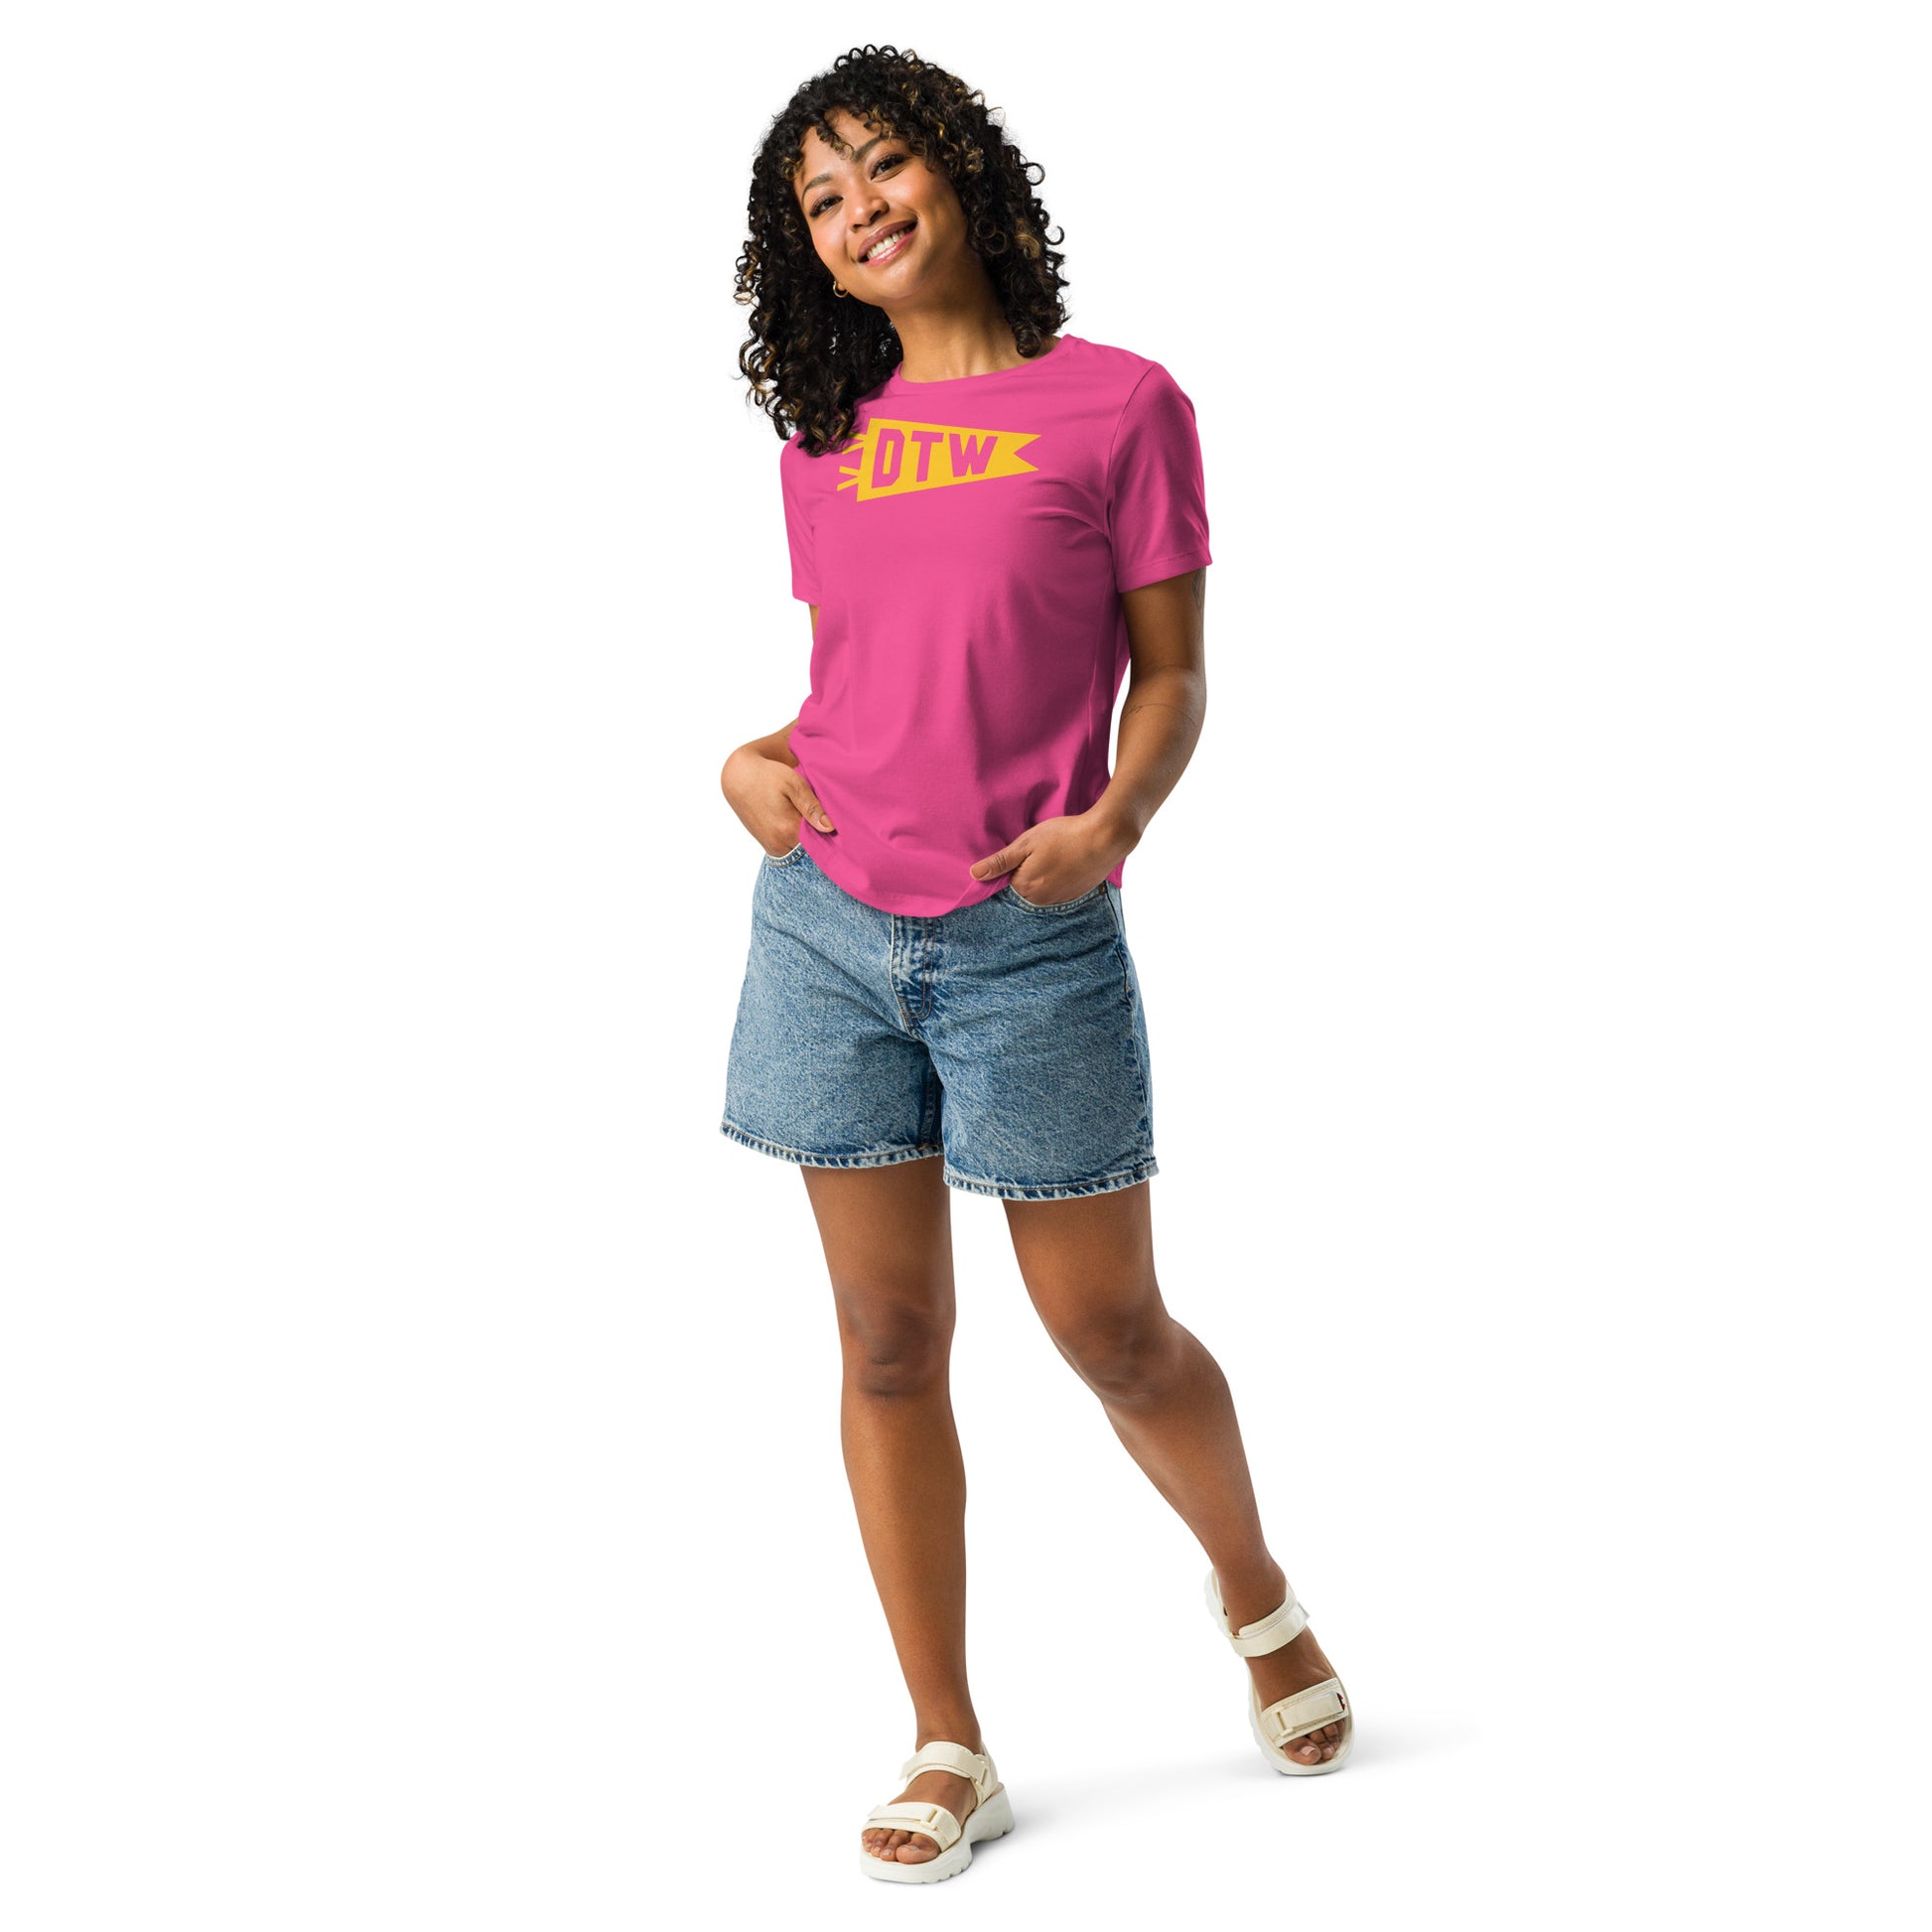 Airport Code Women's Tee - Yellow Graphic • DTW Detroit • YHM Designs - Image 08